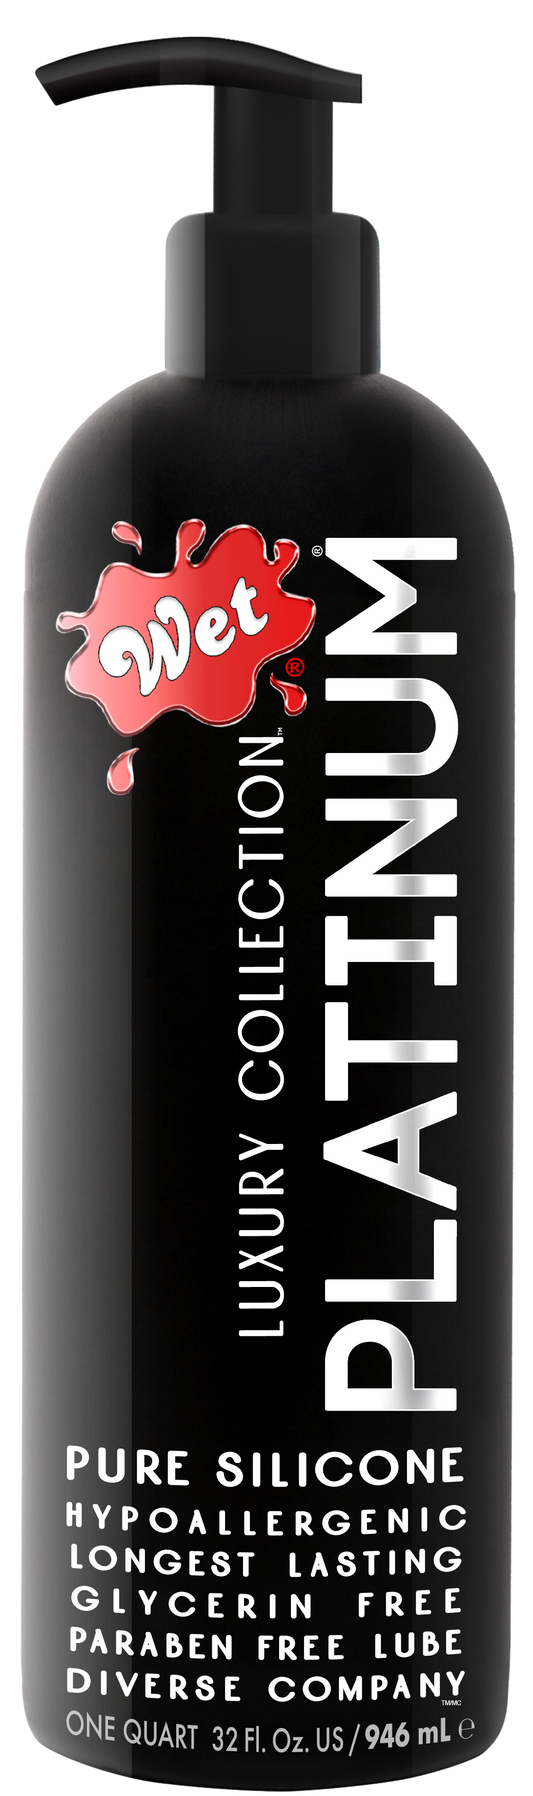 Wet Platinum Silicone Based Sex Lube 32 Ounce